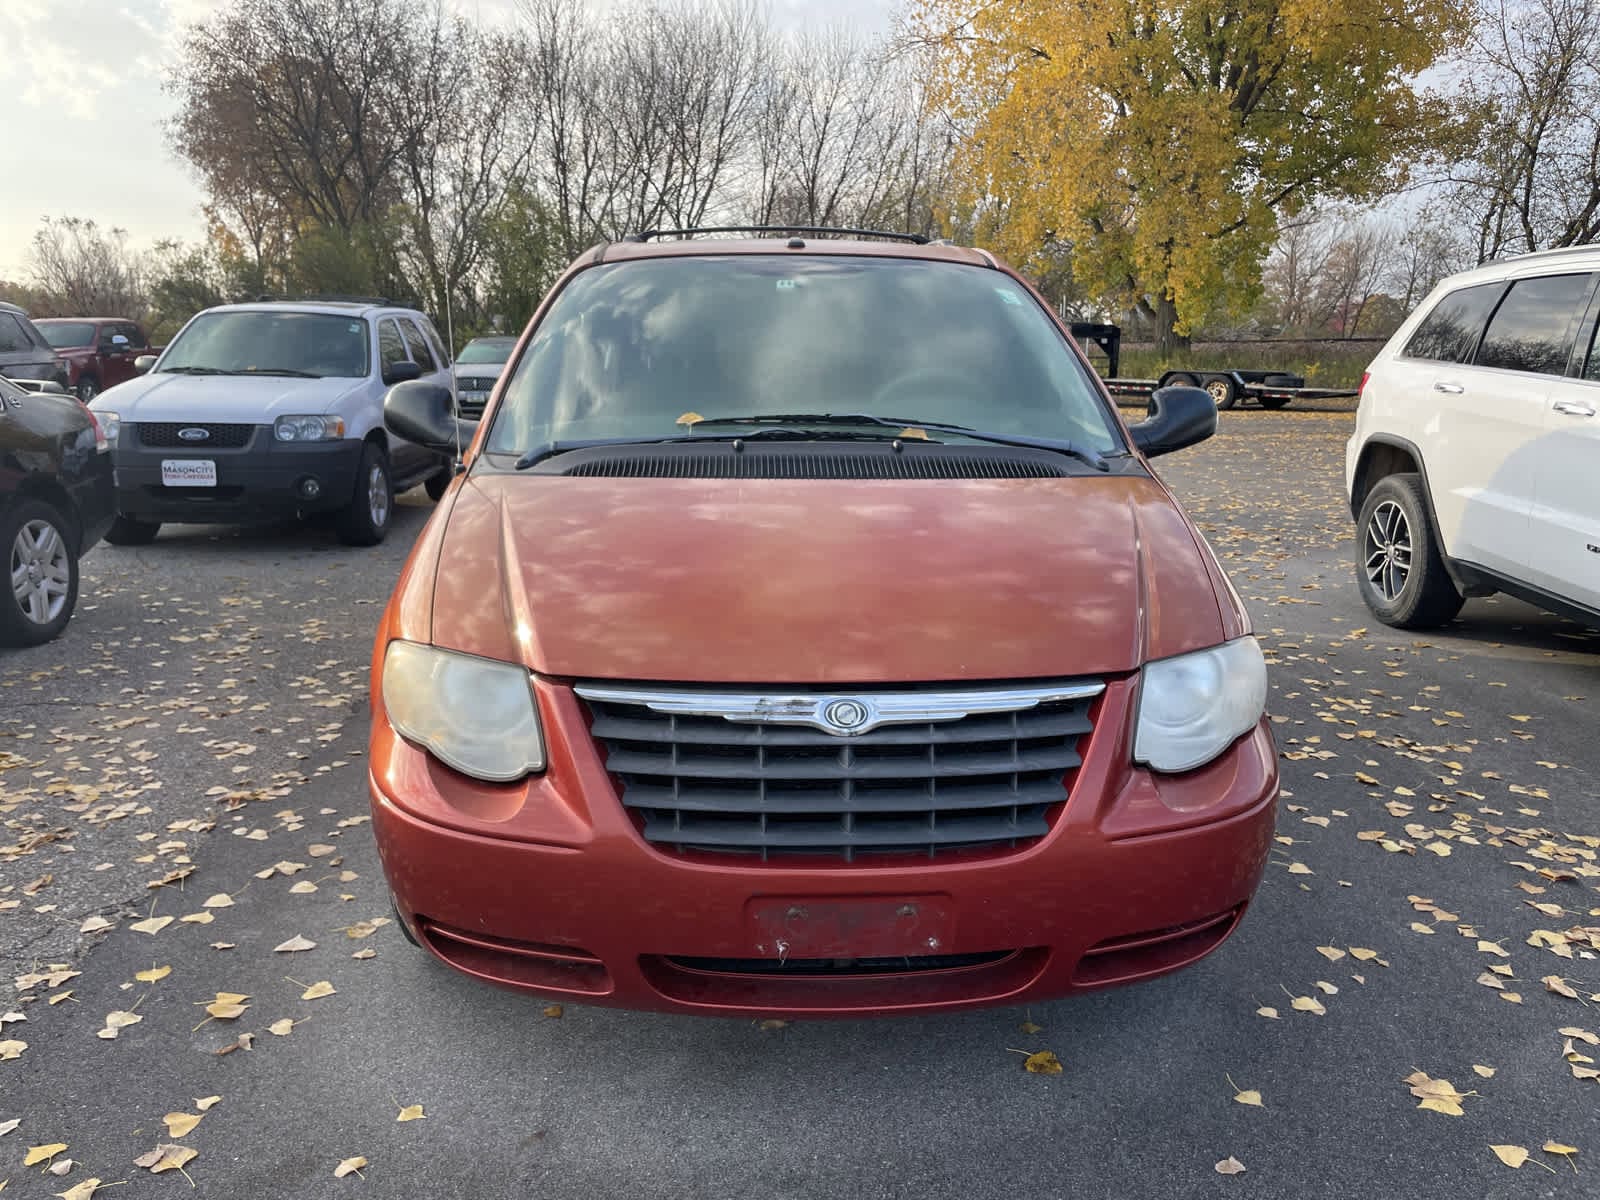 Used 2006 Chrysler Town & Country Touring with VIN 2A4GP54L66R702117 for sale in Mason City, IA